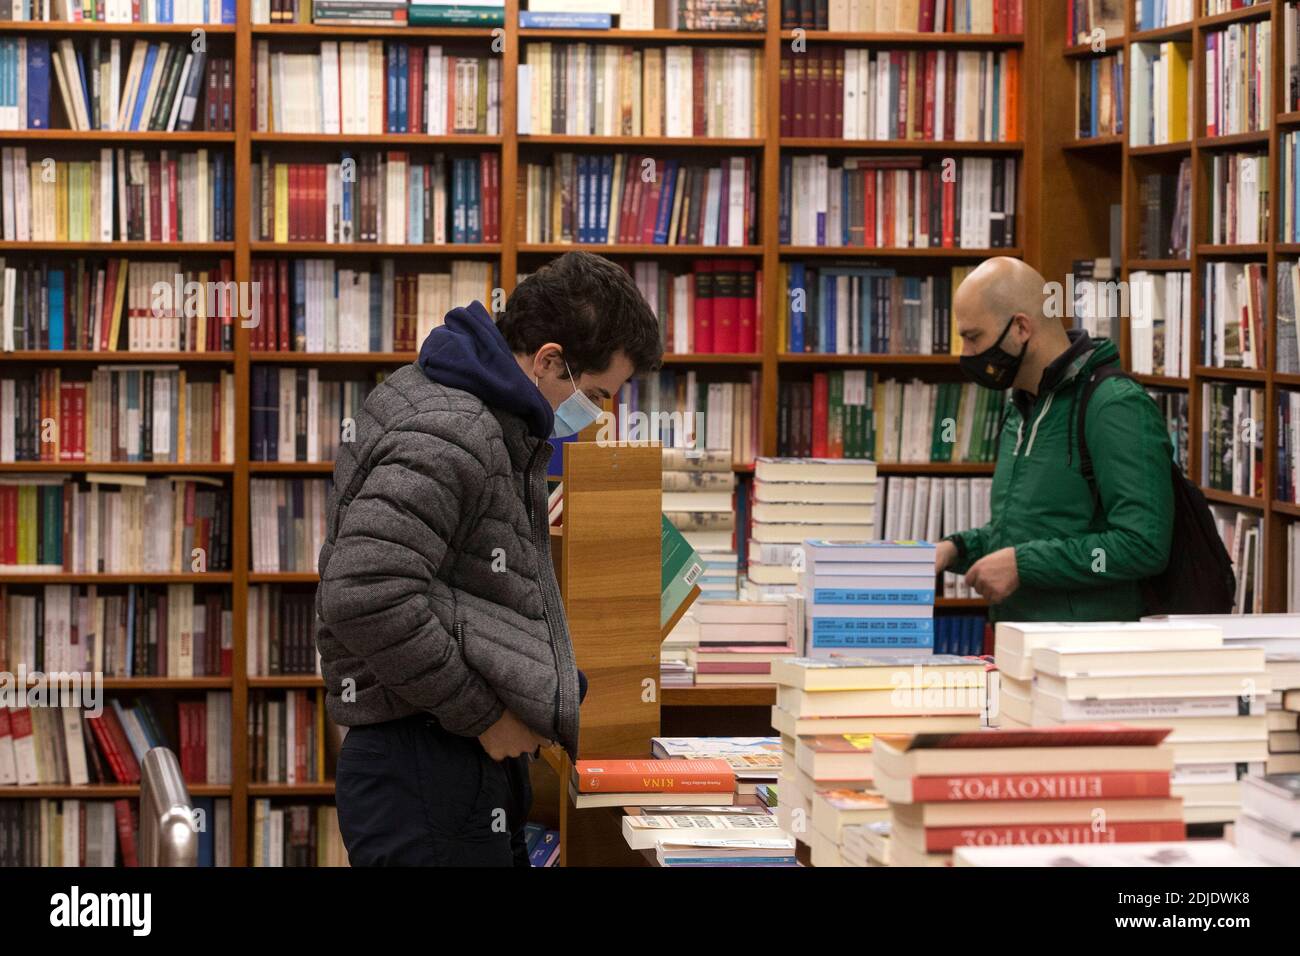 Athens, Greece. 14th Dec, 2020. People wearing face masks are seen in a bookshop in Athens, Greece, Dec. 14, 2020. Greece reported 693 new COVID-19 cases, bringing the national total to 124,534, authorities announced on Sunday. Credit: Marios Lolos/Xinhua/Alamy Live News Stock Photo